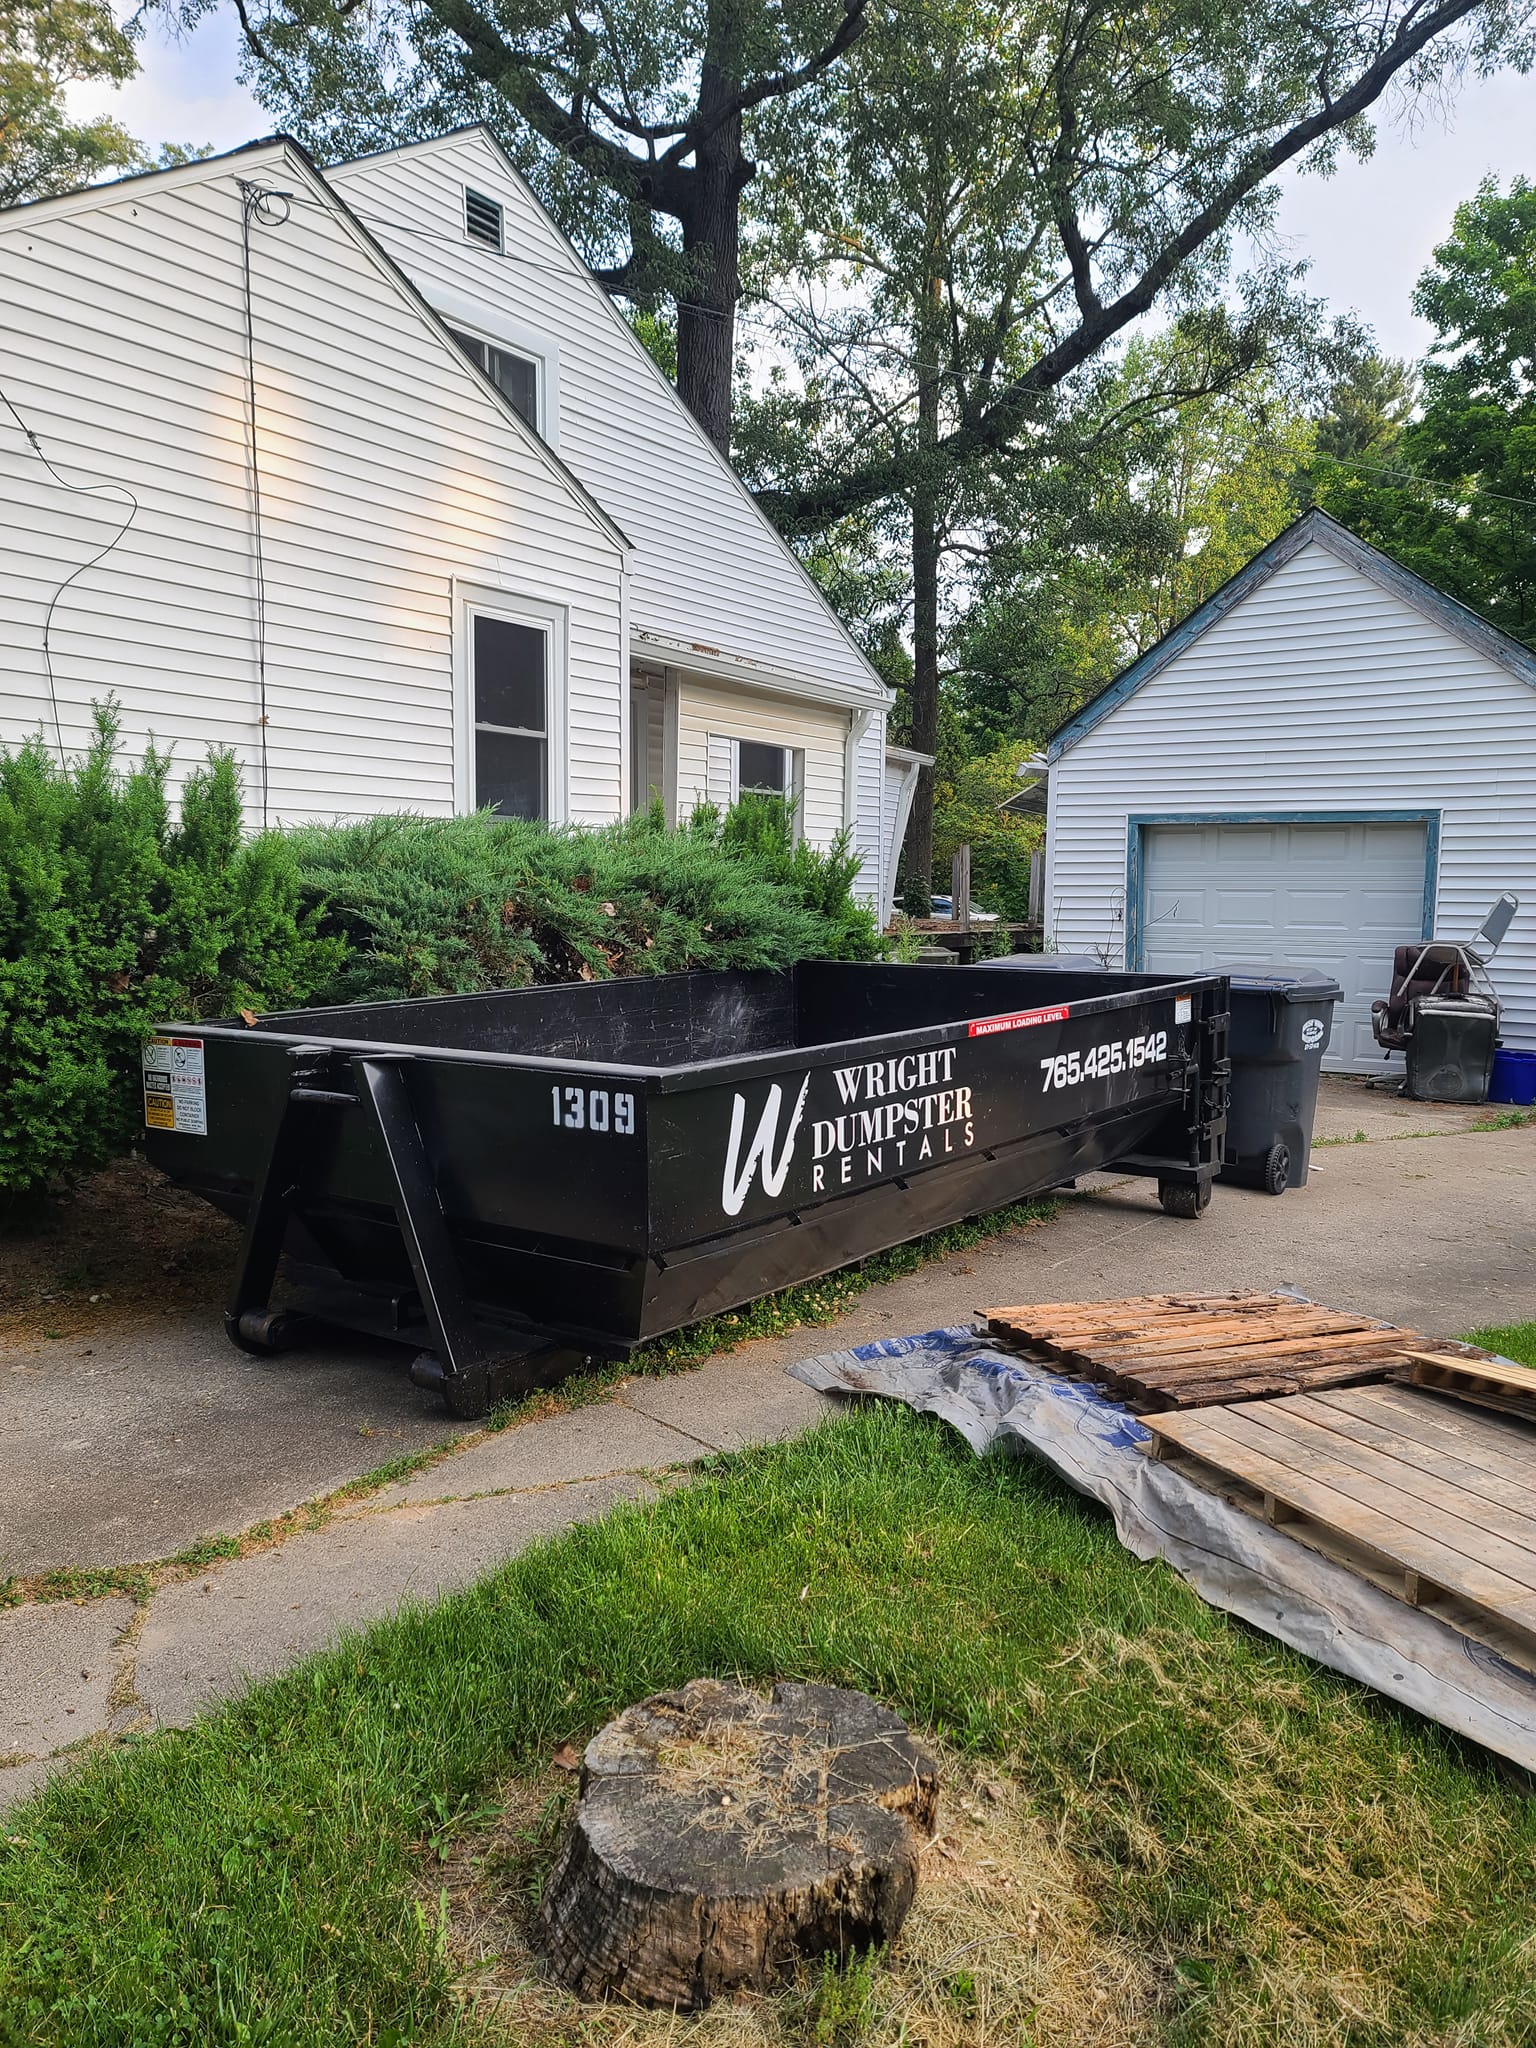 15 yard dumpster by a bush, best dumpster rental company near me, muncie, madison county in, wright dumpster rentals